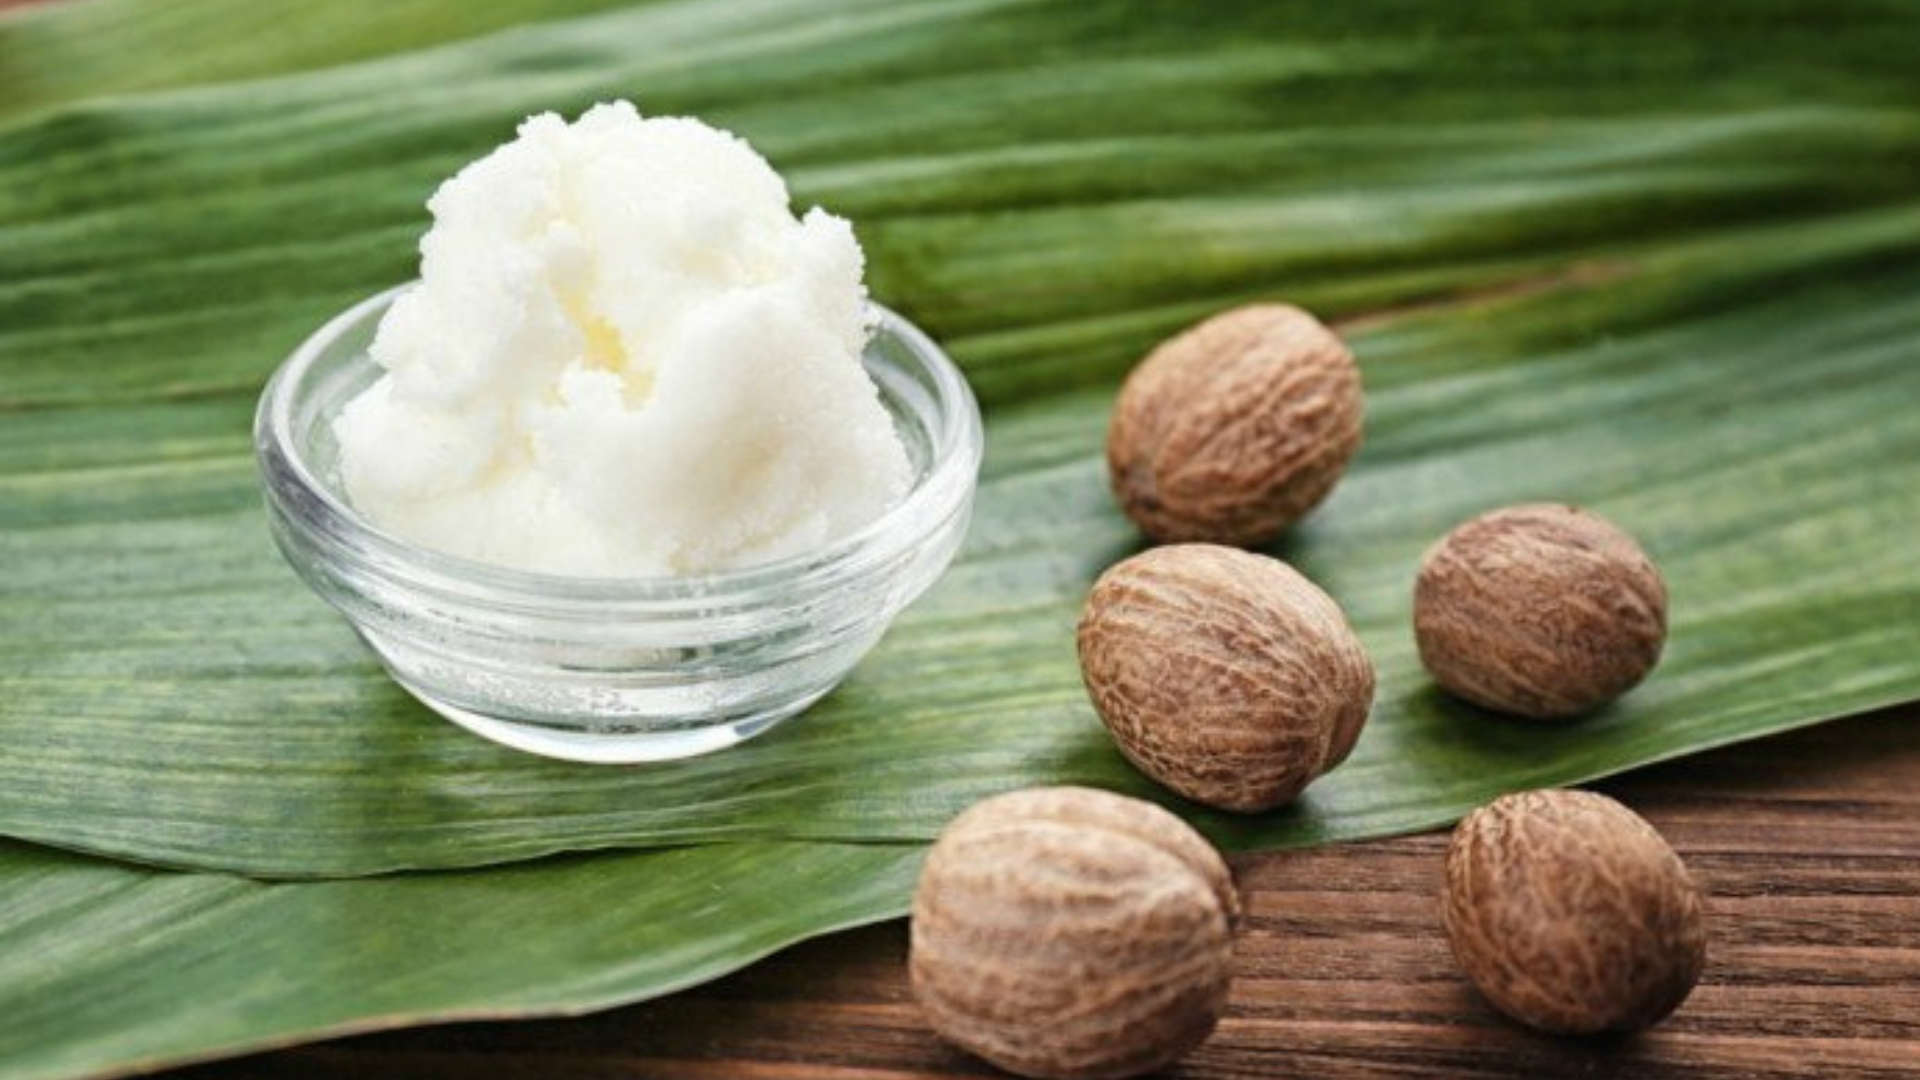 Is Shea Butter Worth All the Hype? - Zosmetics